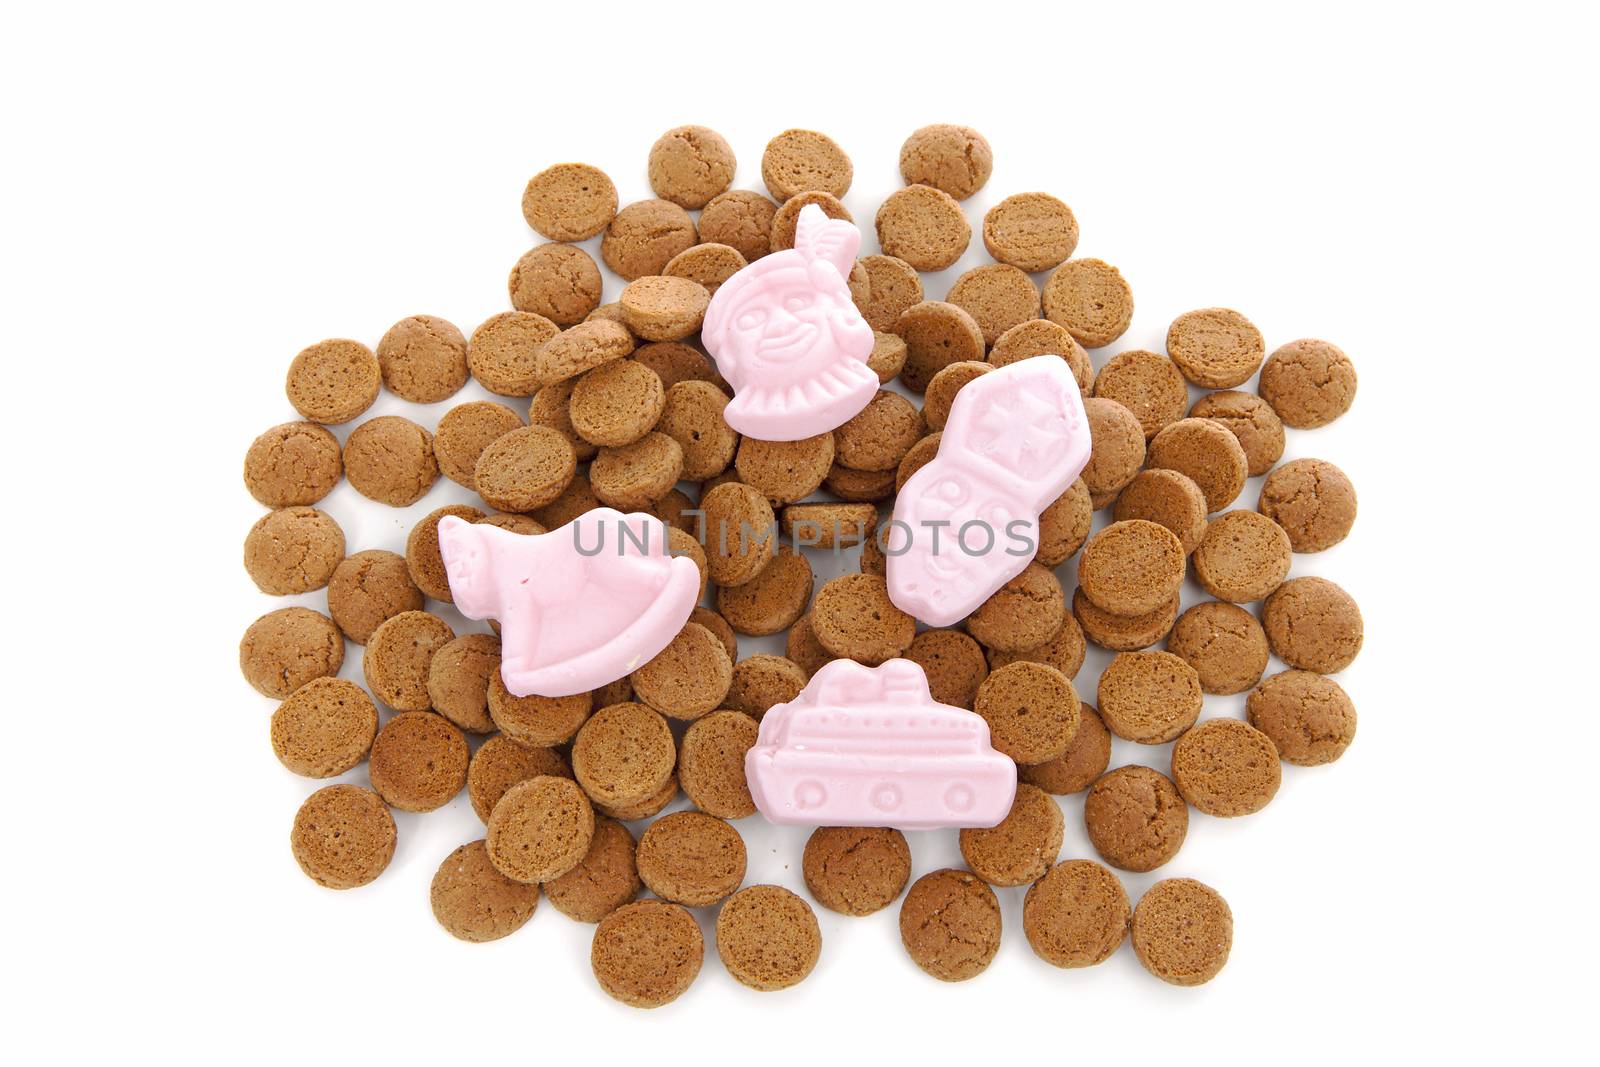 Typical Dutch sweets: pepernoten (ginger nuts) for Sinterklaas; celebration at 5 december in the Netherlands over white background